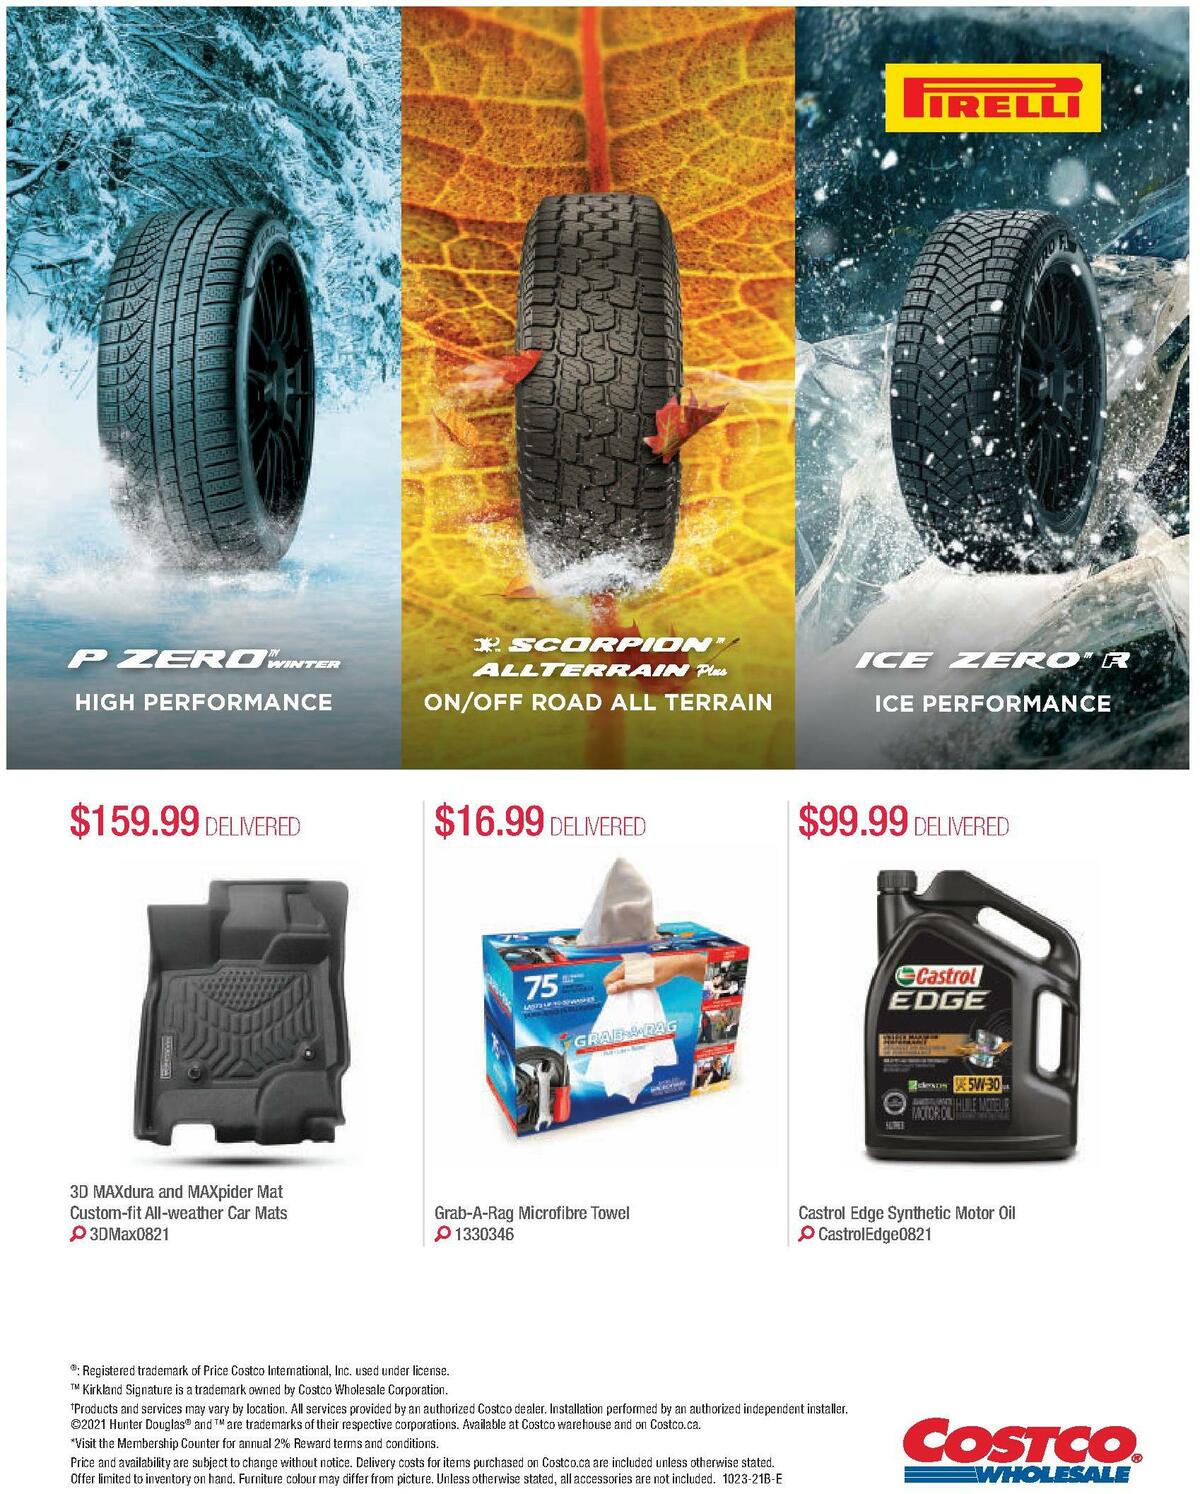 Costco Connection August Flyer from August 1